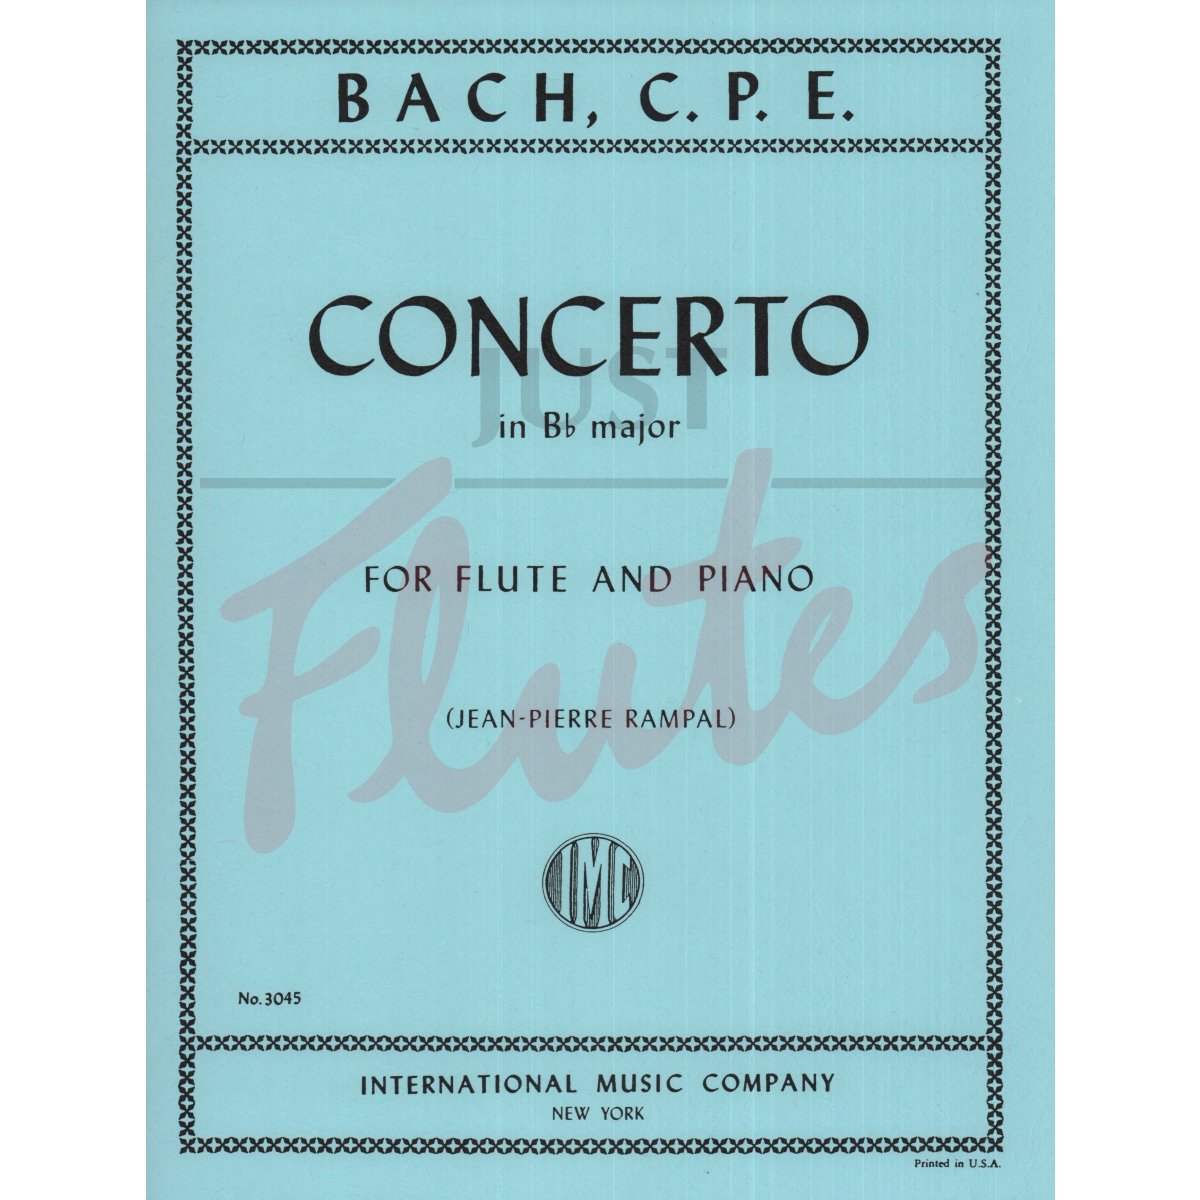 Concerto in Bb major for Flute and Piano